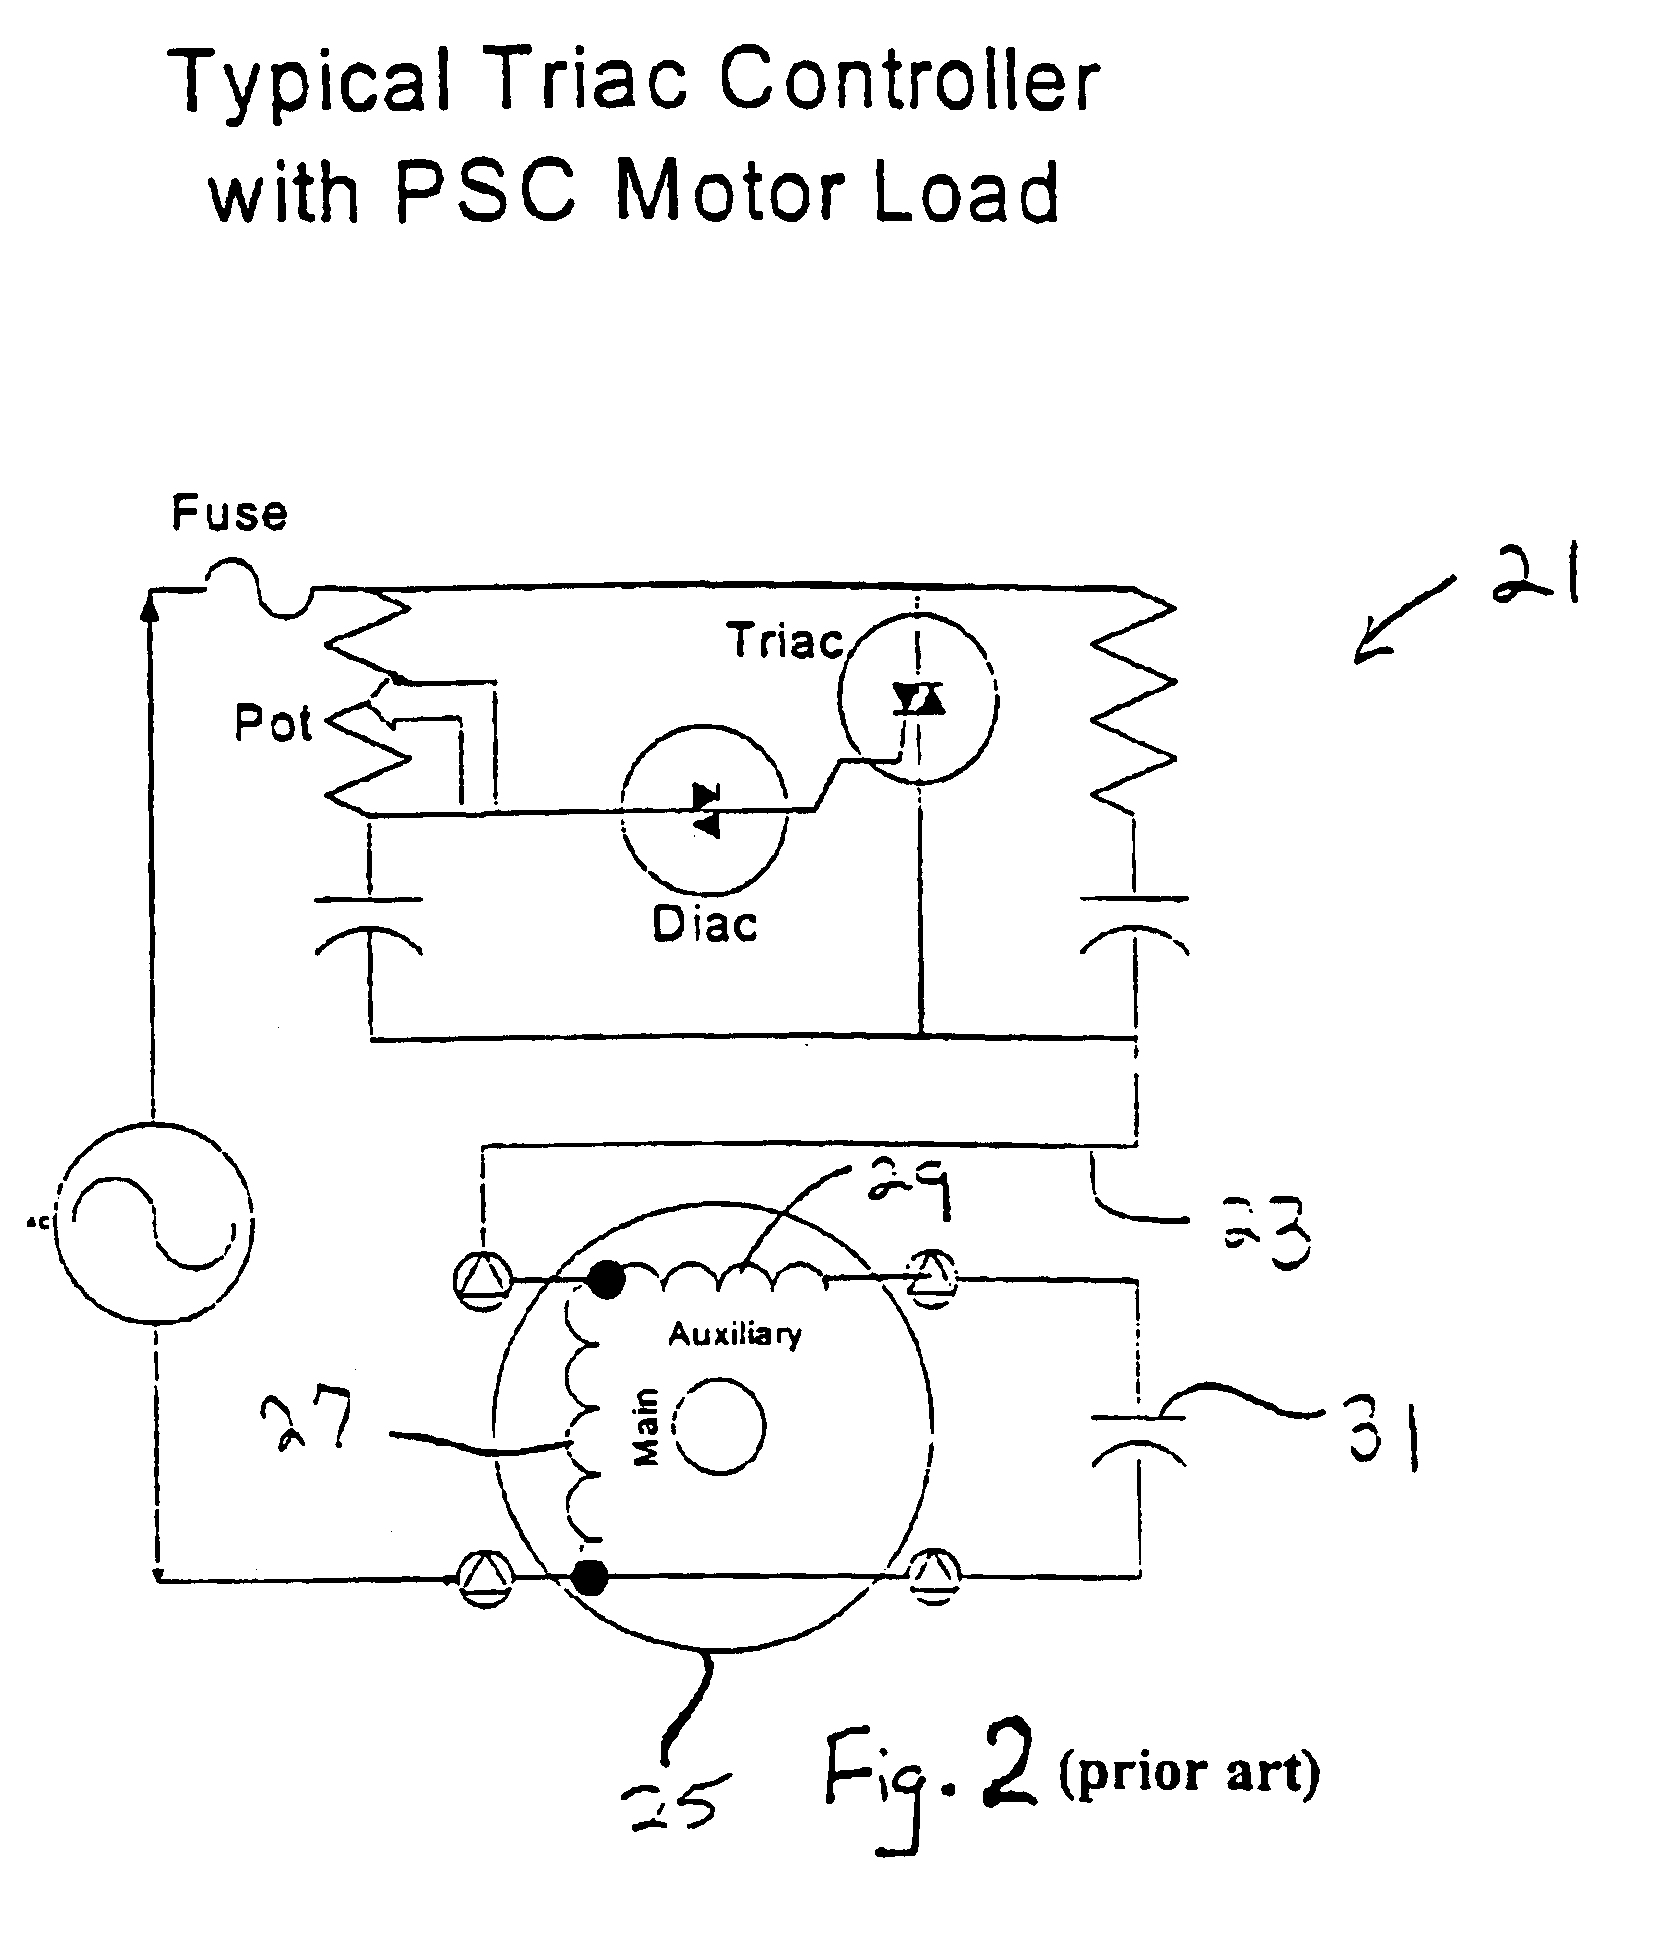 Variable speed controller for air moving applications using an AC induction motor